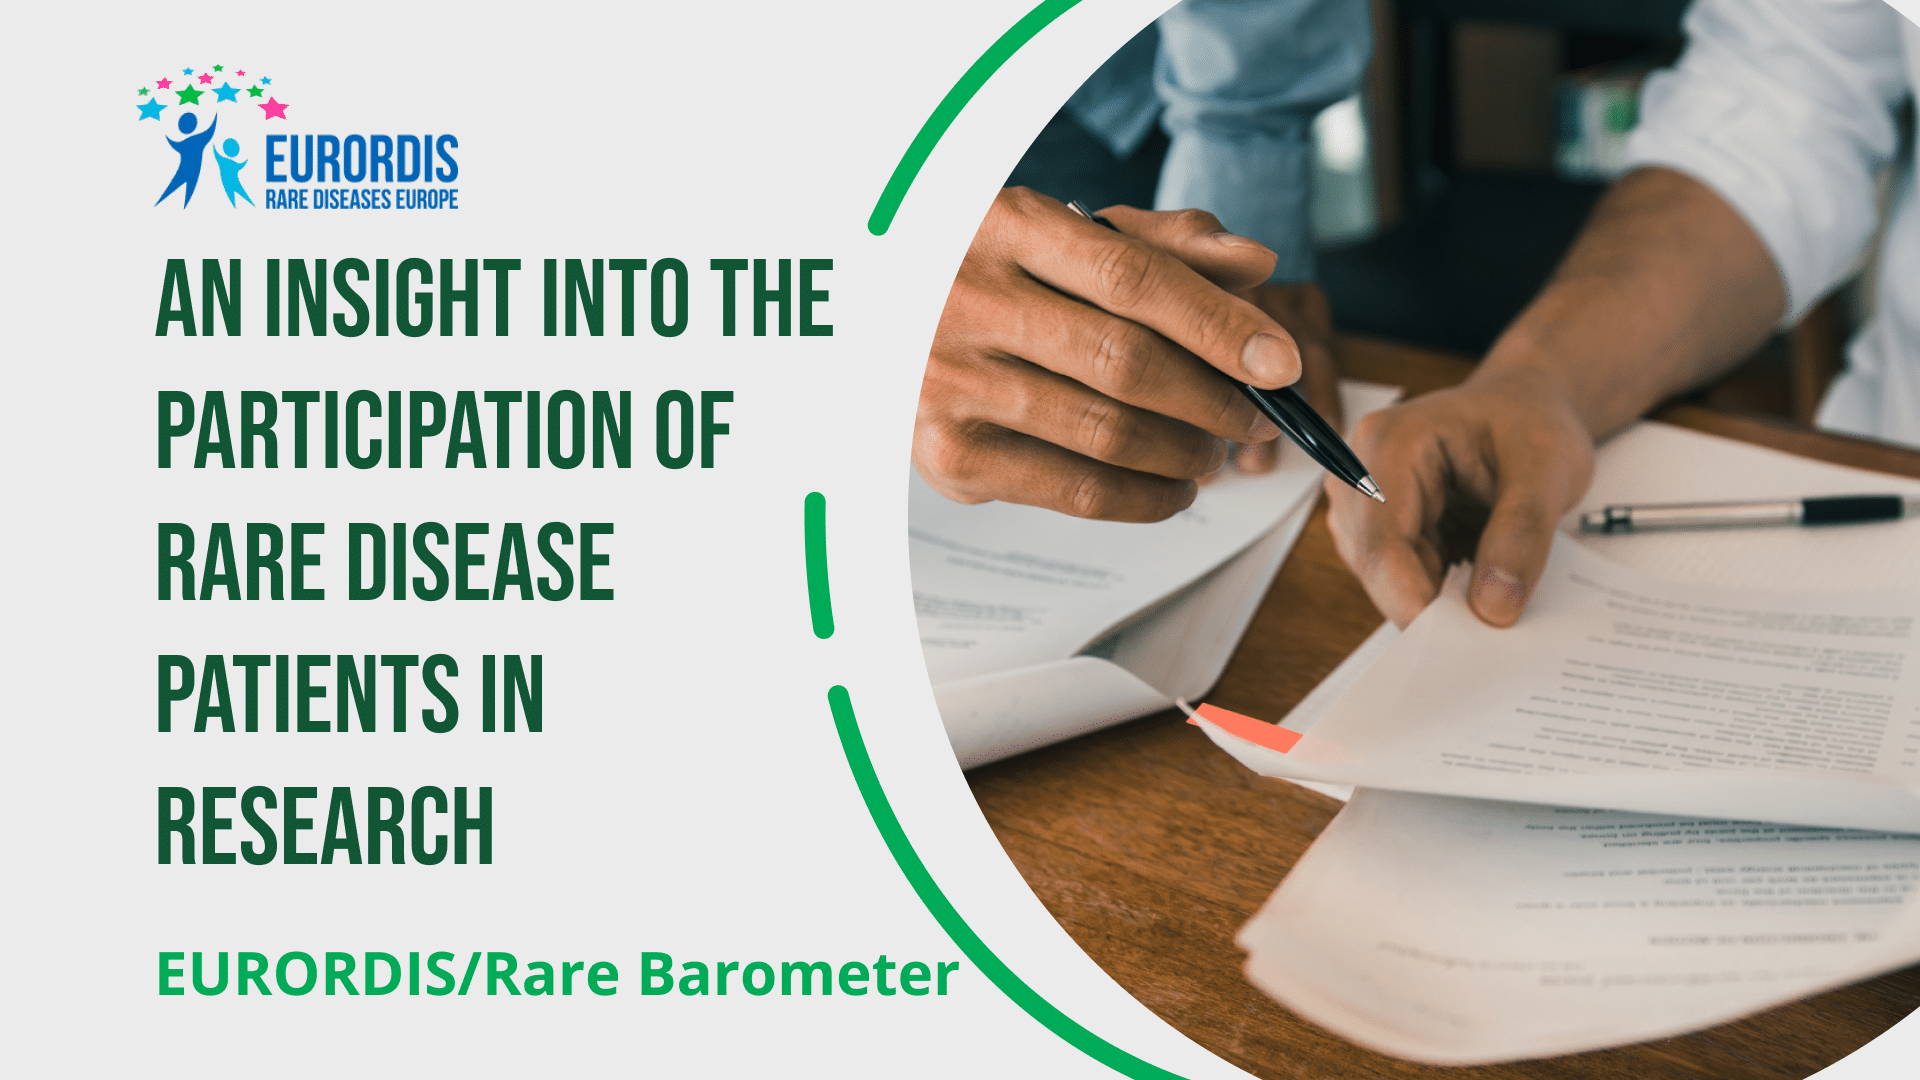 An insight into the participation of rare disease patients in research